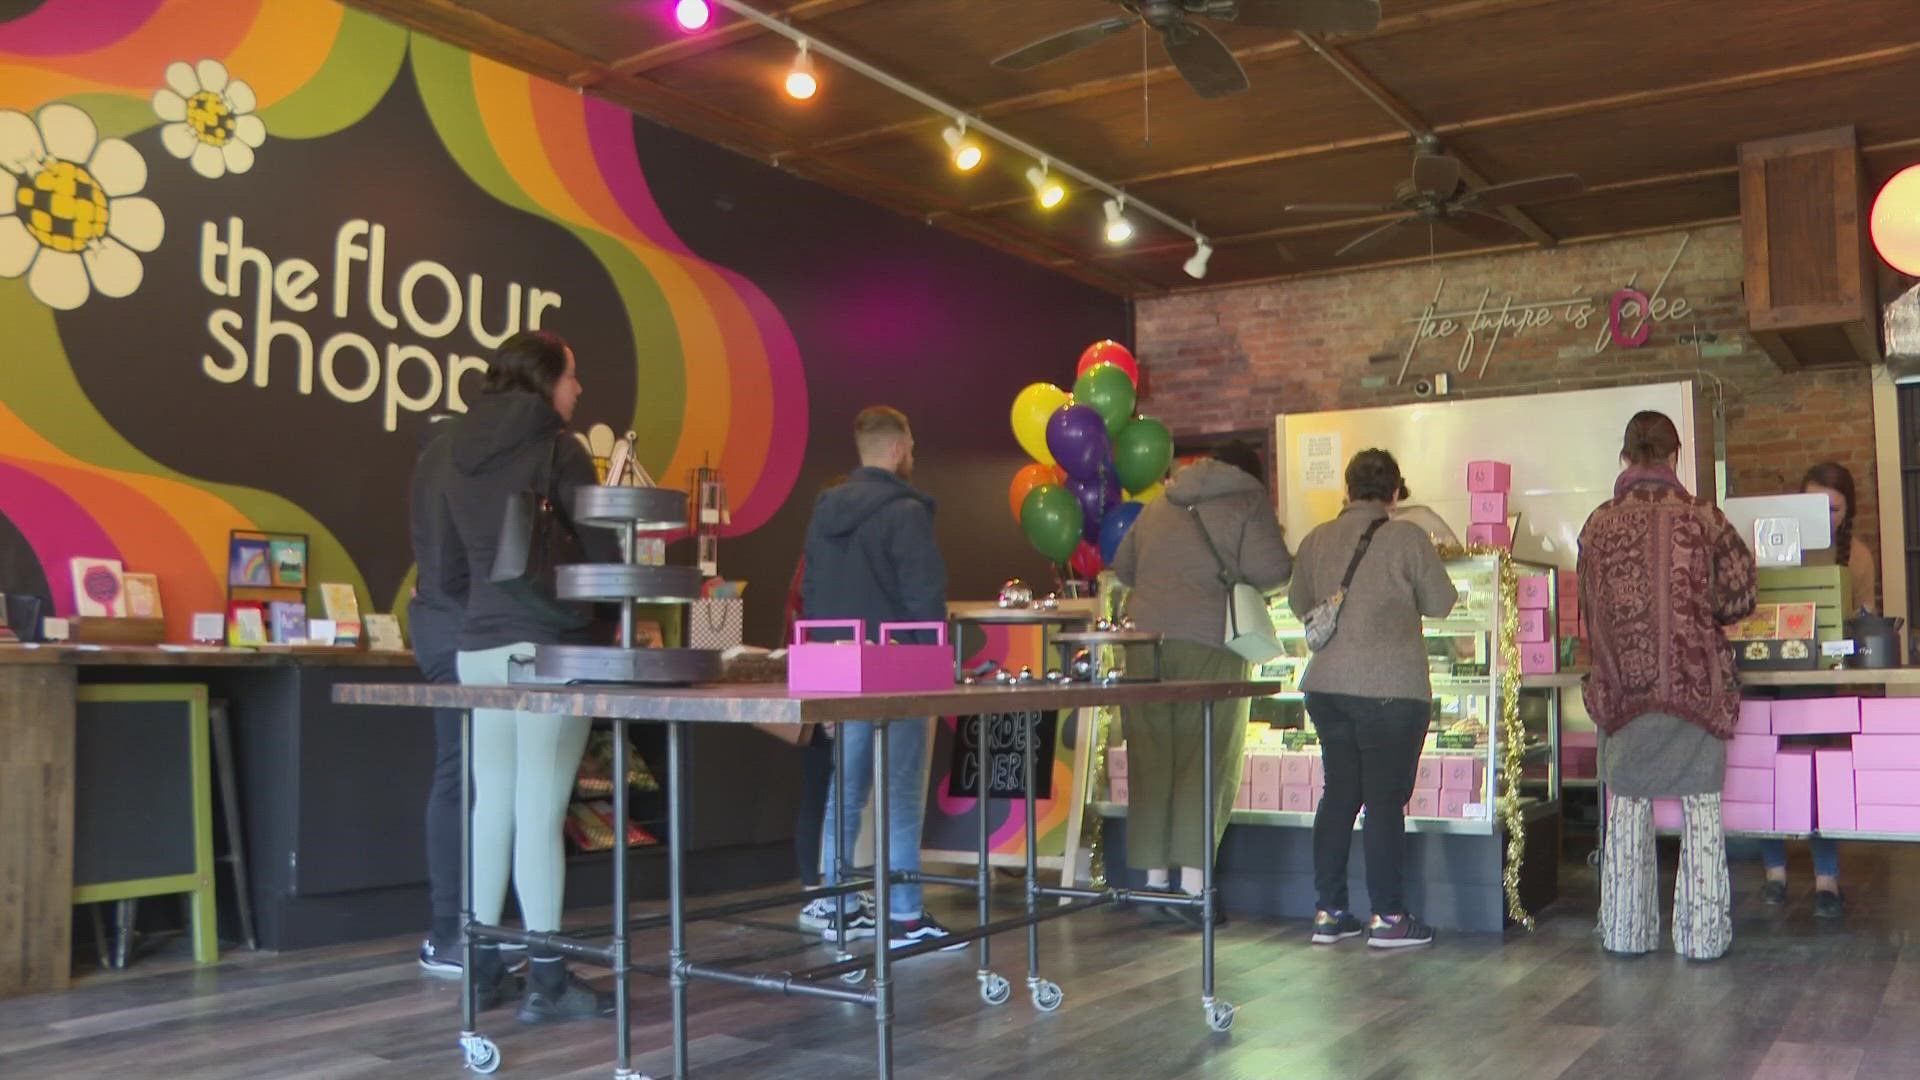 Two competing business owners have joined forces to create The Flour Shoppe, an all vegan bakery on Baxter Avenue.